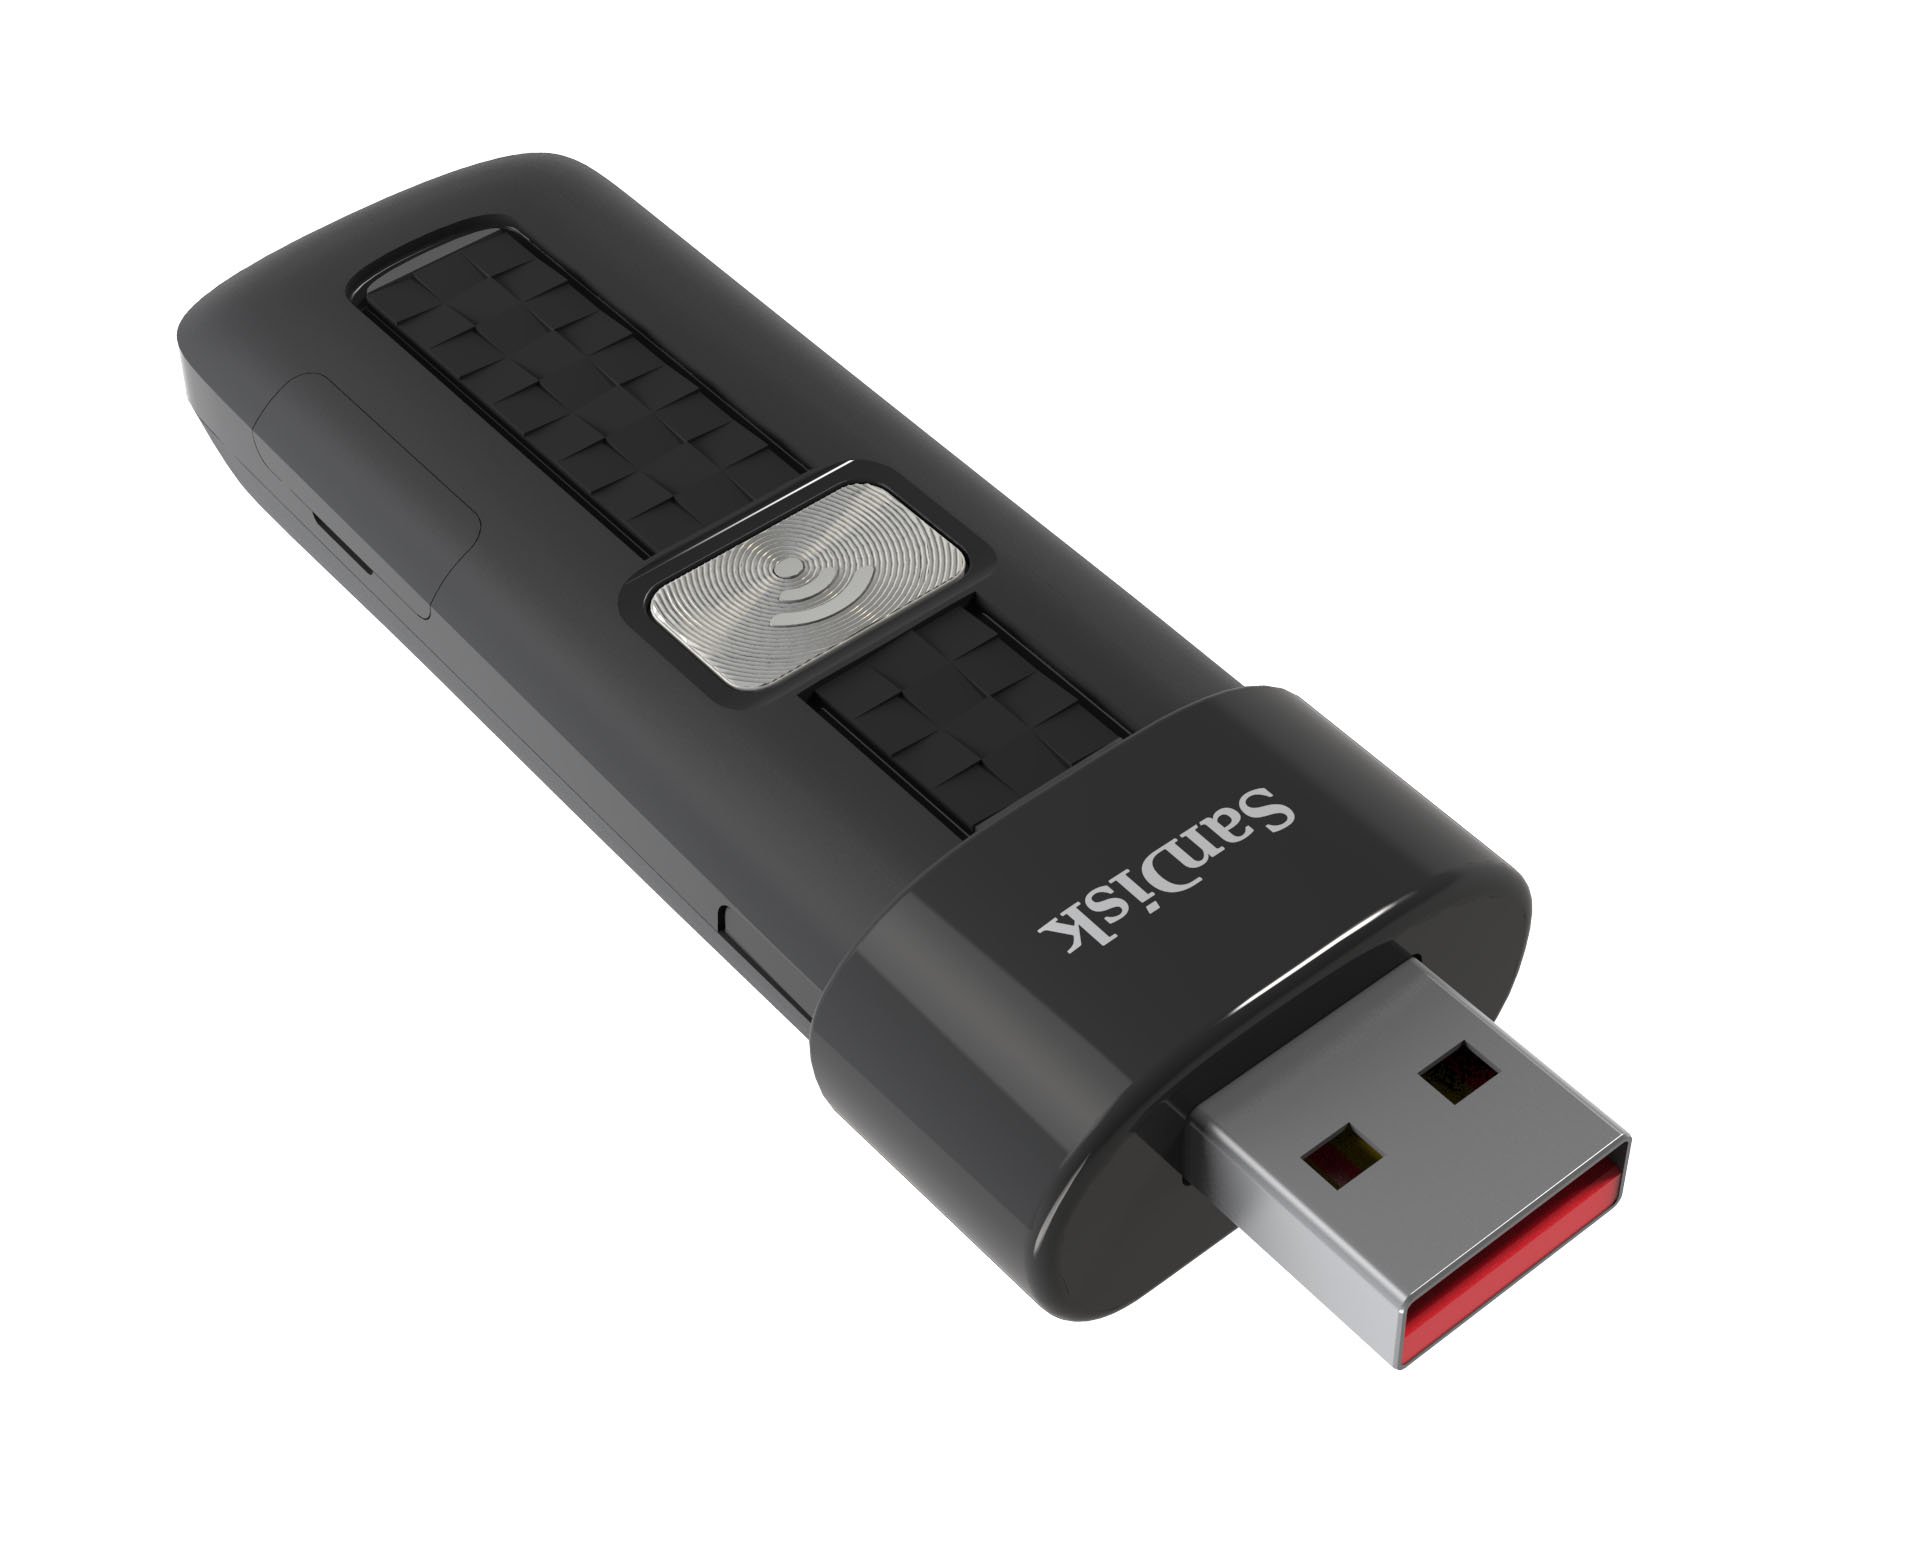 SanDisk Connect Wireless Flash Drive - Leftfront